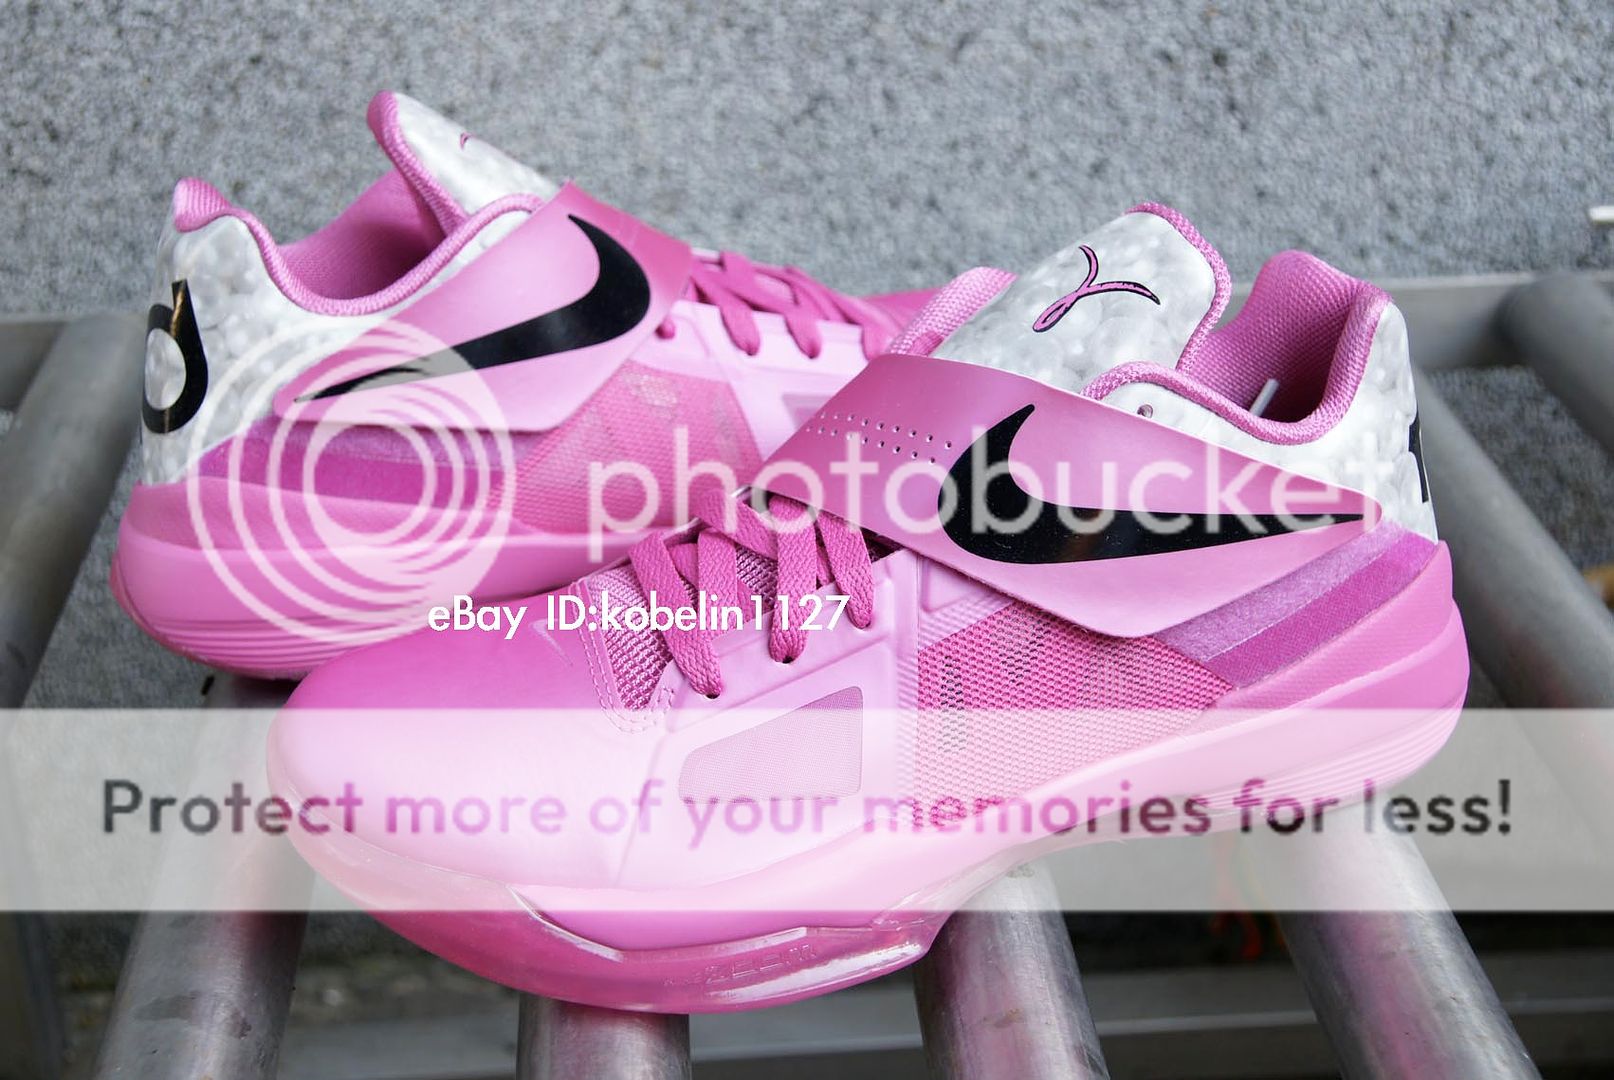   Nike Zoom KD IV 4 Think Pink Kevin Durant Aunt Pearl galaxy 473679 601